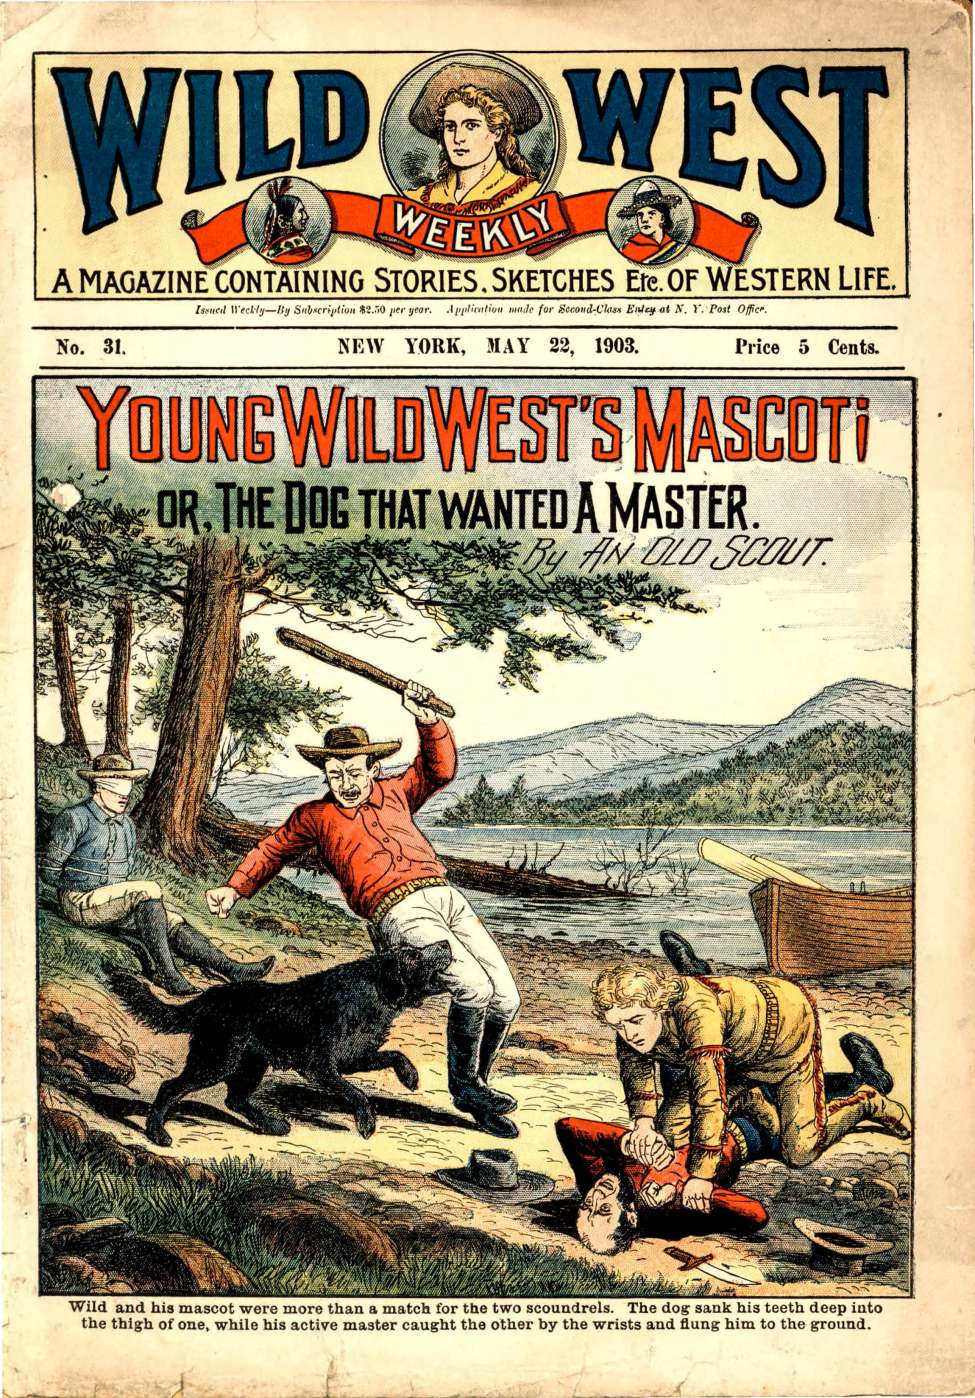 Book Cover For Wild West Weekly 31 - Young Wild West's Mascot